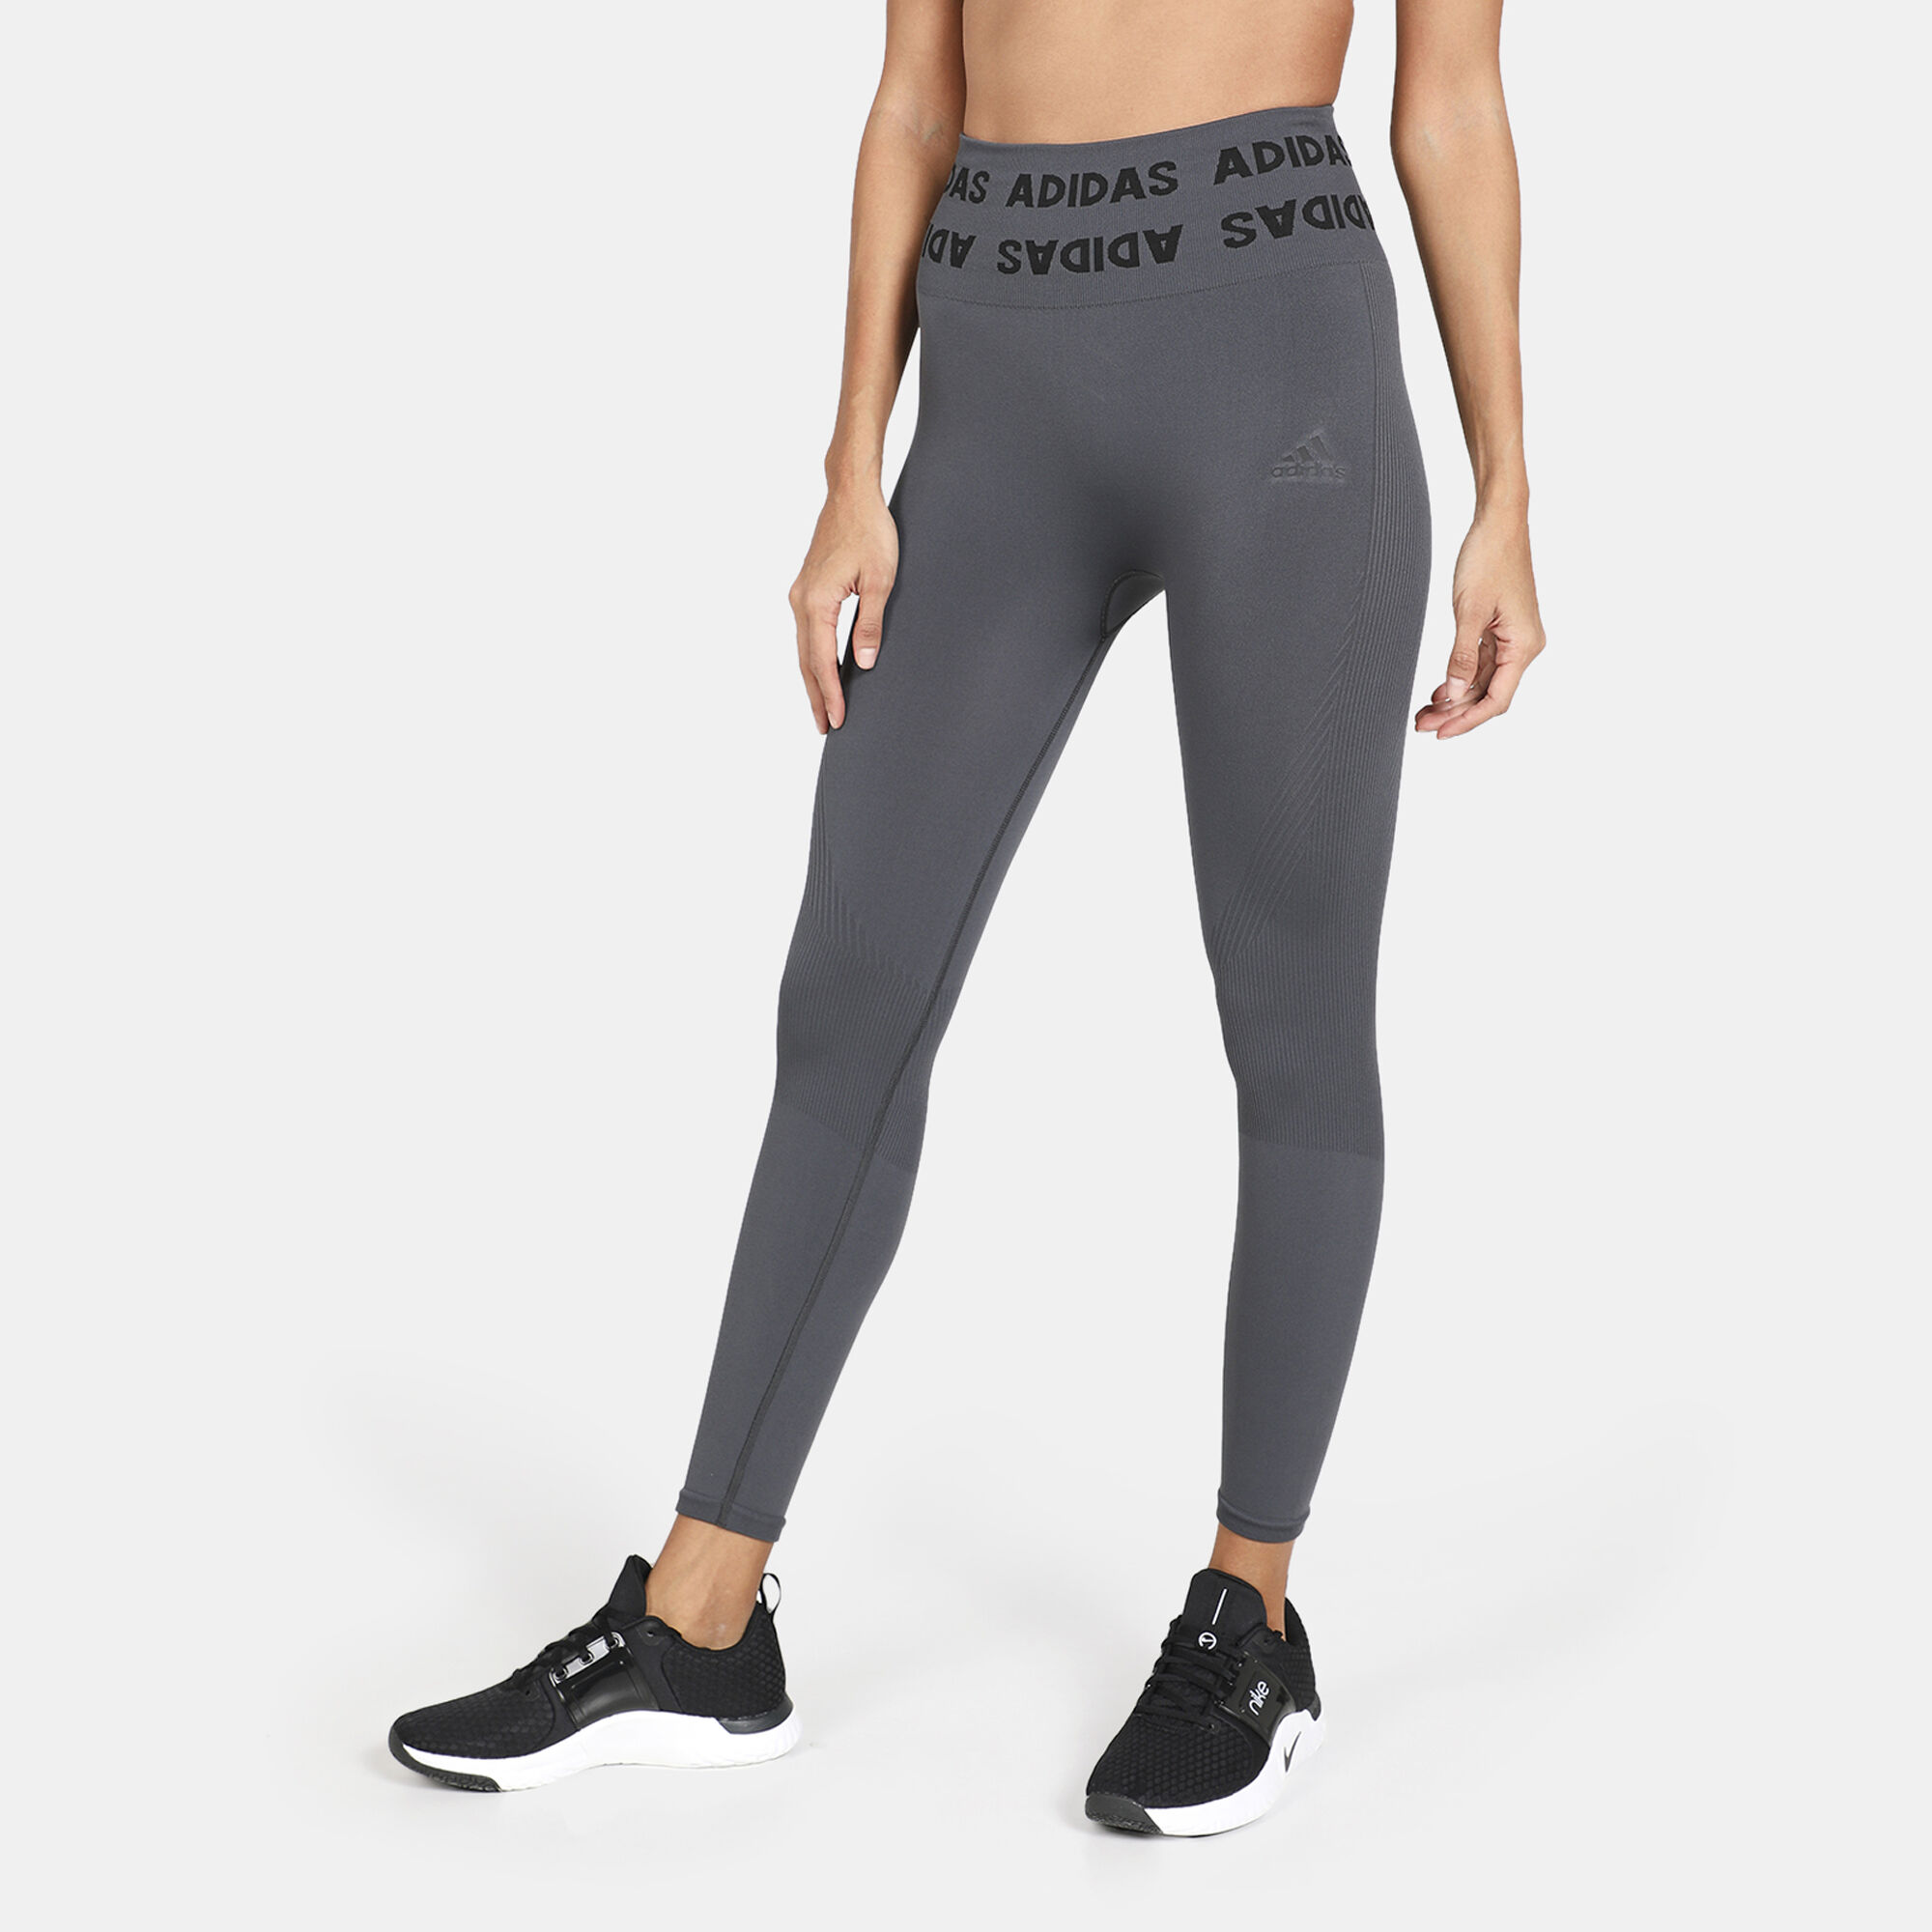 Men's Running Pants and Tights | REI Co-op